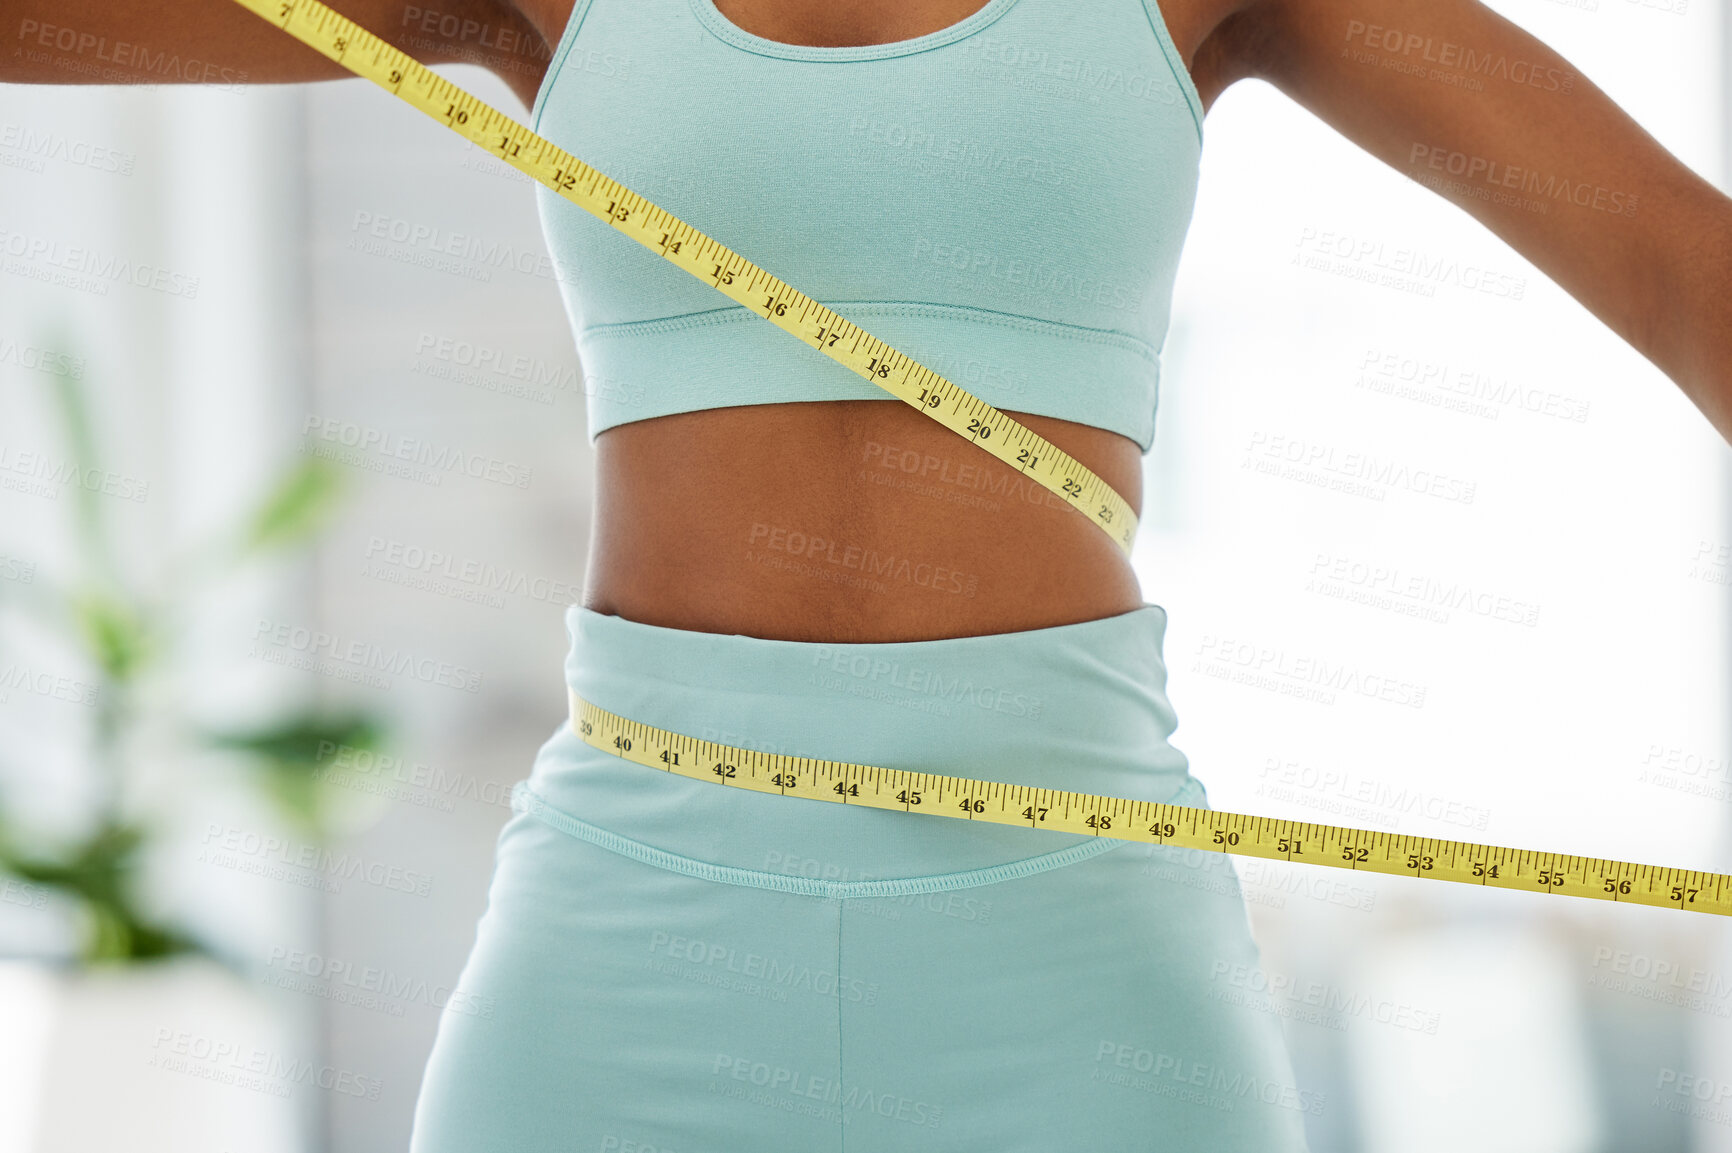 Buy stock photo Cropped shot of an unrecognisable woman standing alone and using a measuring tape around her waist in a yoga studio